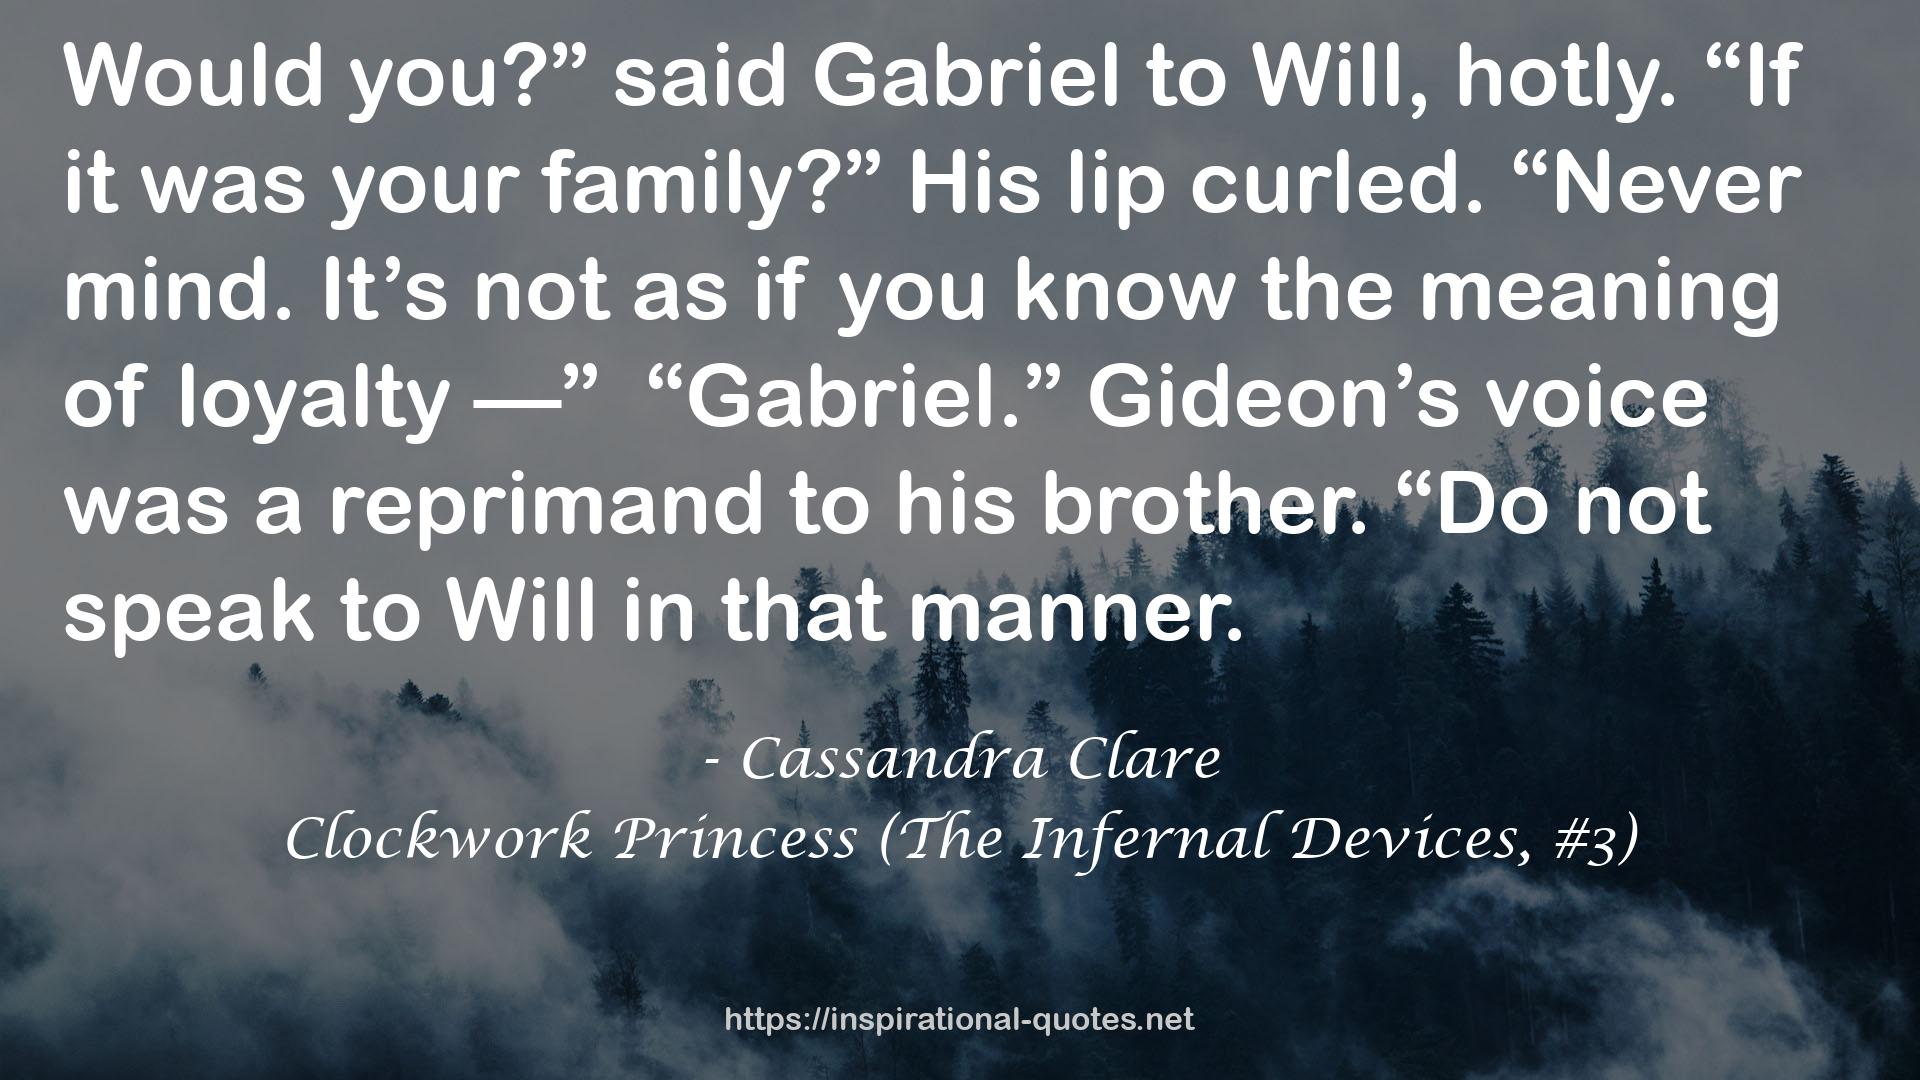 Clockwork Princess (The Infernal Devices, #3) QUOTES